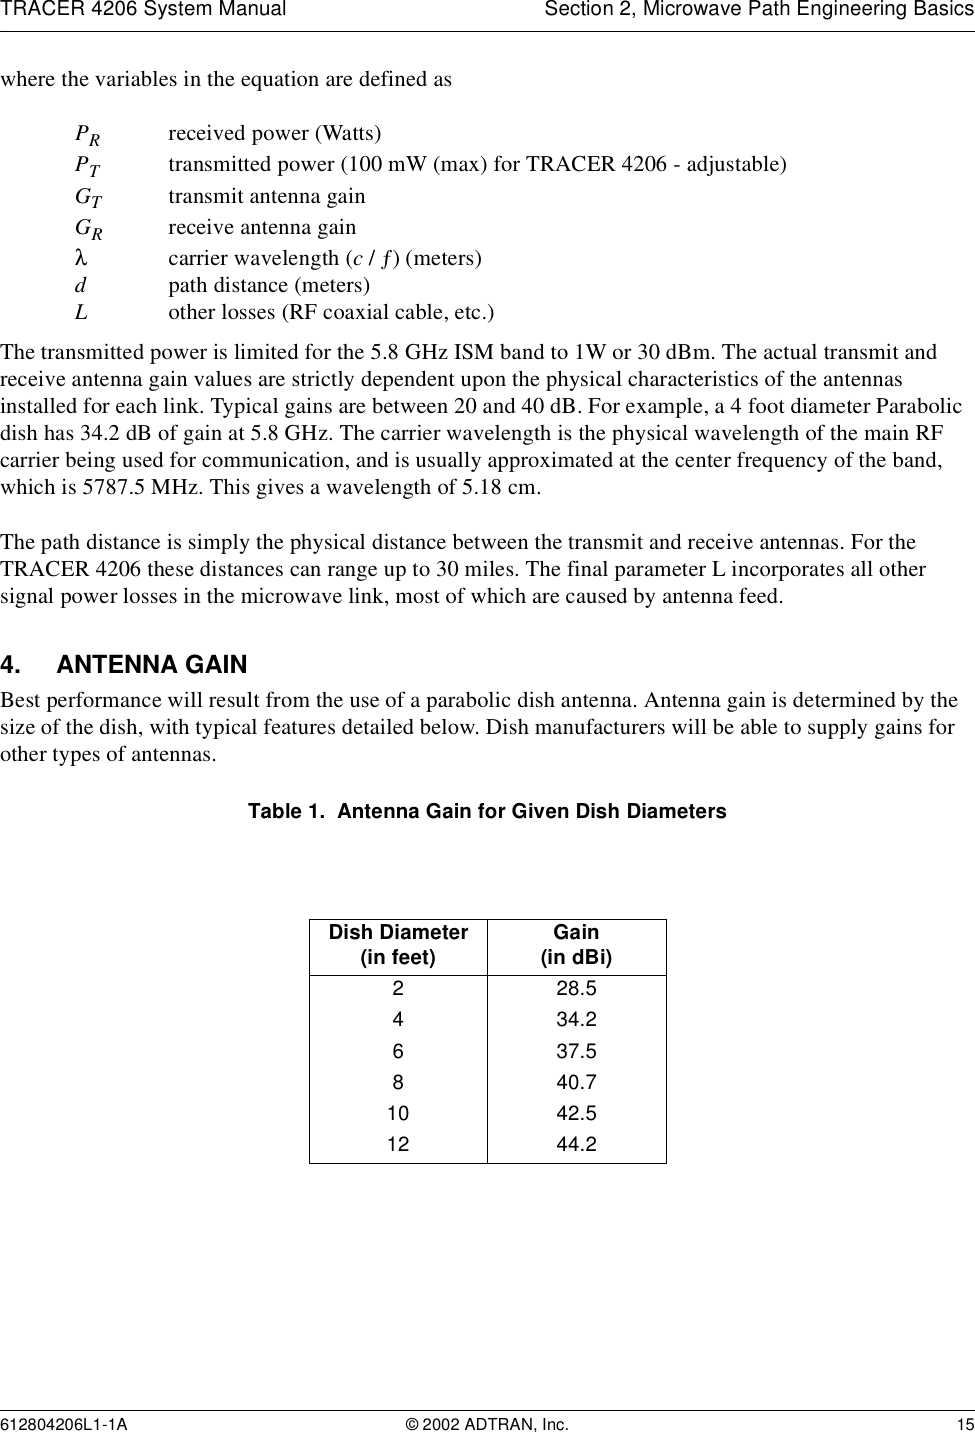 TRACER 4206 System Manual Section 2, Microwave Path Engineering Basics612804206L1-1A © 2002 ADTRAN, Inc. 15where the variables in the equation are defined asPRreceived power (Watts)PTtransmitted power (100 mW (max) for TRACER 4206 - adjustable)GTtransmit antenna gainGRreceive antenna gainλcarrier wavelength (c / ƒ) (meters)dpath distance (meters)Lother losses (RF coaxial cable, etc.)The transmitted power is limited for the 5.8 GHz ISM band to 1W or 30 dBm. The actual transmit and receive antenna gain values are strictly dependent upon the physical characteristics of the antennas installed for each link. Typical gains are between 20 and 40 dB. For example, a 4 foot diameter Parabolic dish has 34.2 dB of gain at 5.8 GHz. The carrier wavelength is the physical wavelength of the main RF carrier being used for communication, and is usually approximated at the center frequency of the band, which is 5787.5 MHz. This gives a wavelength of 5.18 cm.The path distance is simply the physical distance between the transmit and receive antennas. For the TRACER 4206 these distances can range up to 30 miles. The final parameter L incorporates all other signal power losses in the microwave link, most of which are caused by antenna feed.4. ANTENNA GAINBest performance will result from the use of a parabolic dish antenna. Antenna gain is determined by the size of the dish, with typical features detailed below. Dish manufacturers will be able to supply gains for other types of antennas.Table 1.  Antenna Gain for Given Dish DiametersDish Diameter(in feet) Gain(in dBi)228.5434.2637.5840.710 42.512 44.2